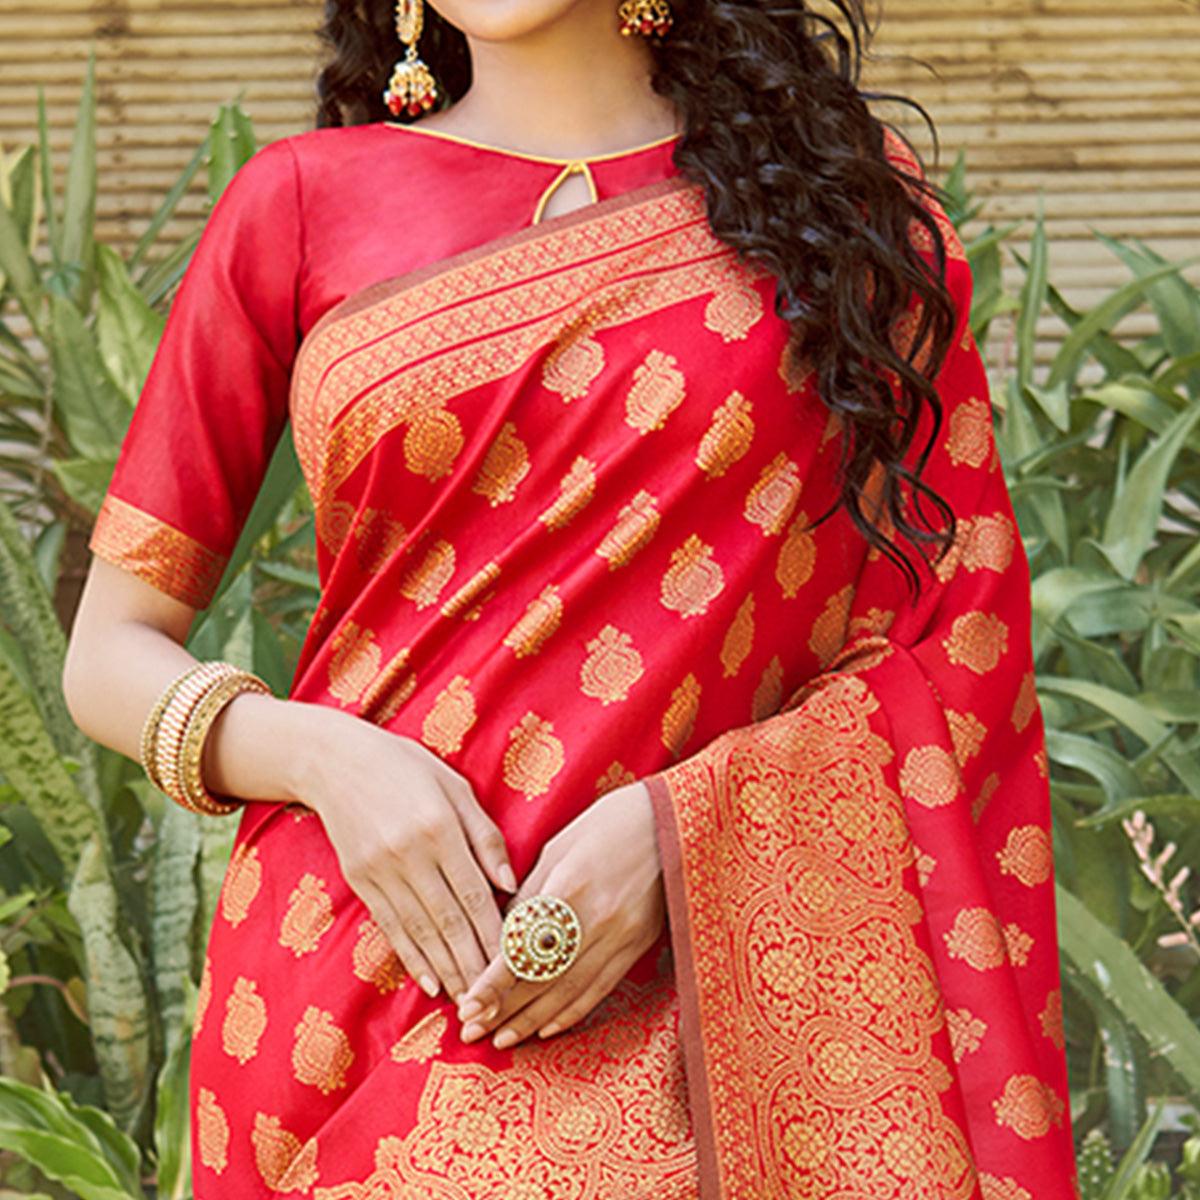 Majesty Red Colored Festive Wear Floral Woven Silk Blend Saree With Tassels - Peachmode